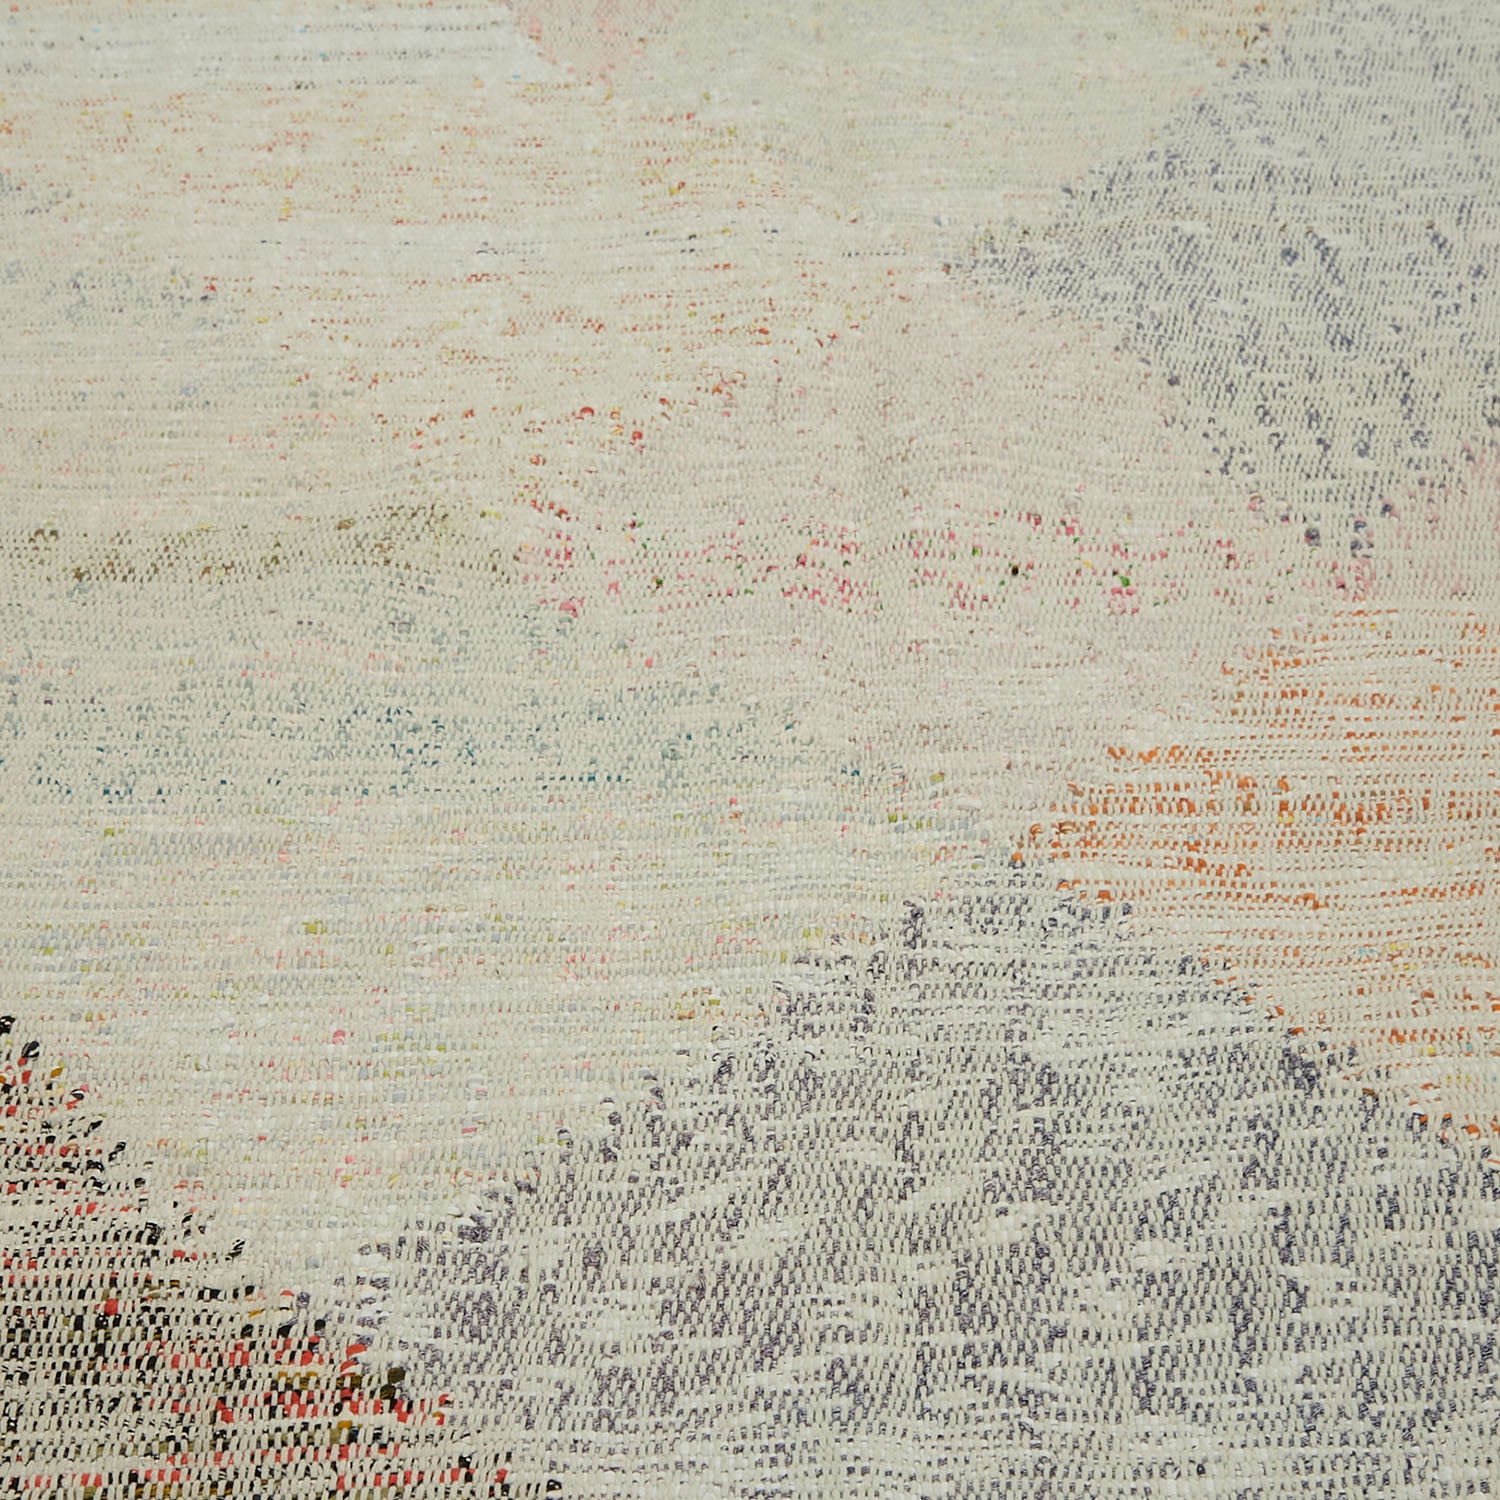 Close-up of intricate stitched fabric with subtle colors and flowing texture